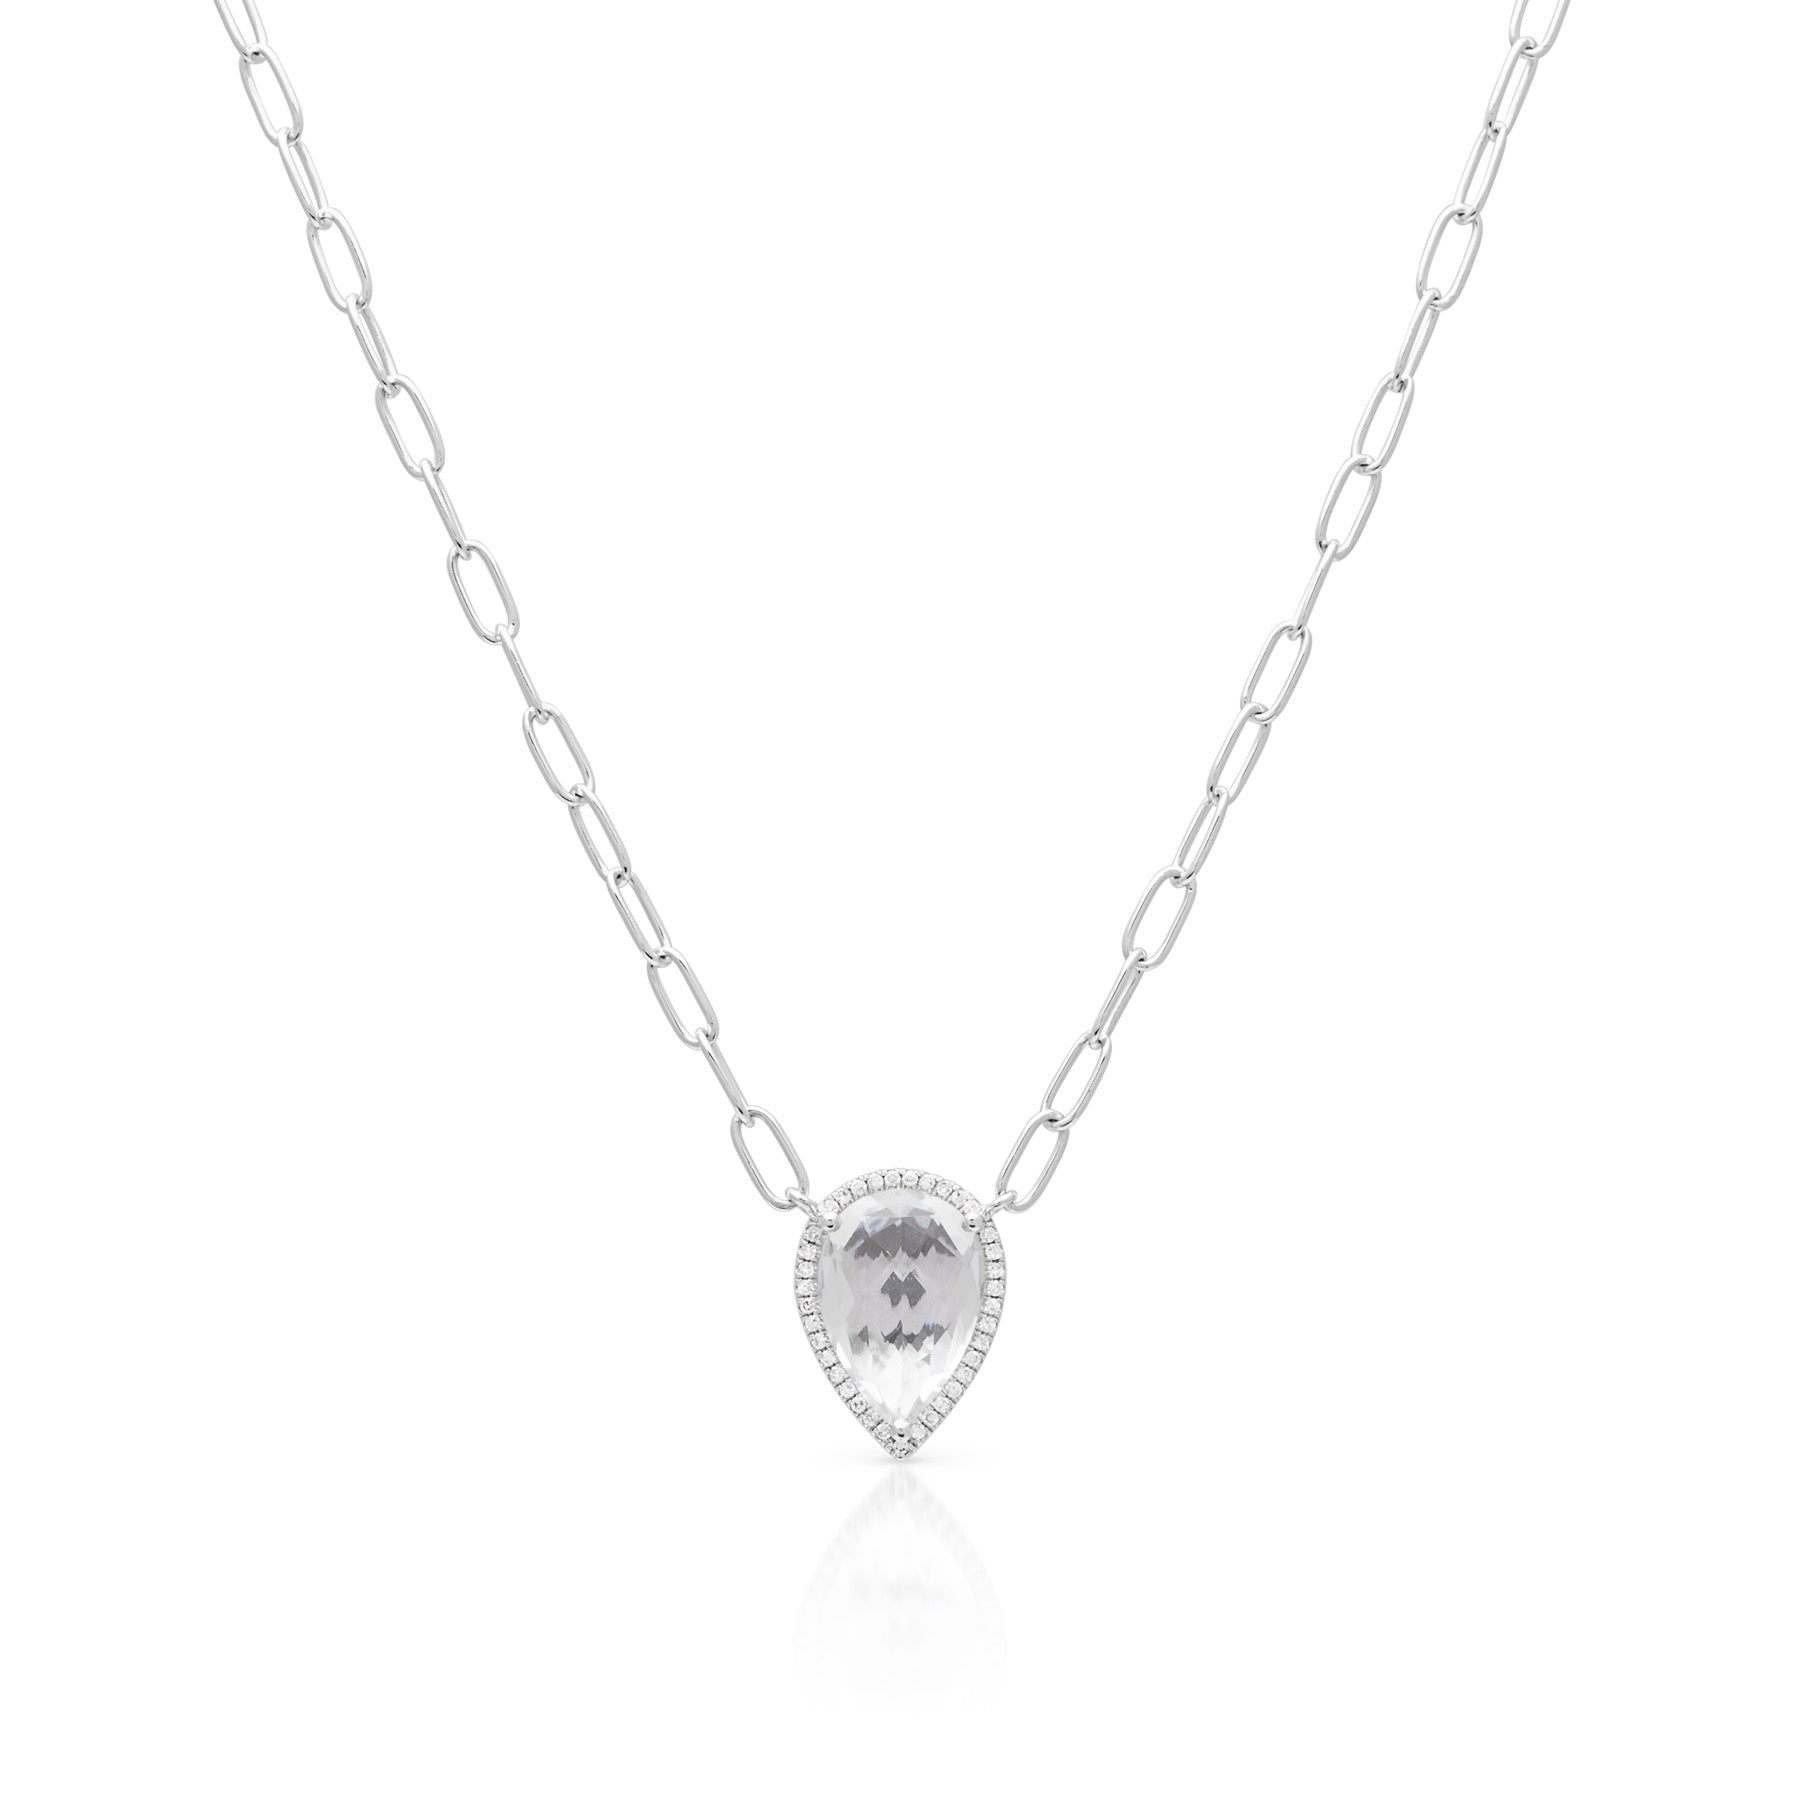 14KT White Gold White Topaz Diamond Luxe Sophie Chain Link Necklace